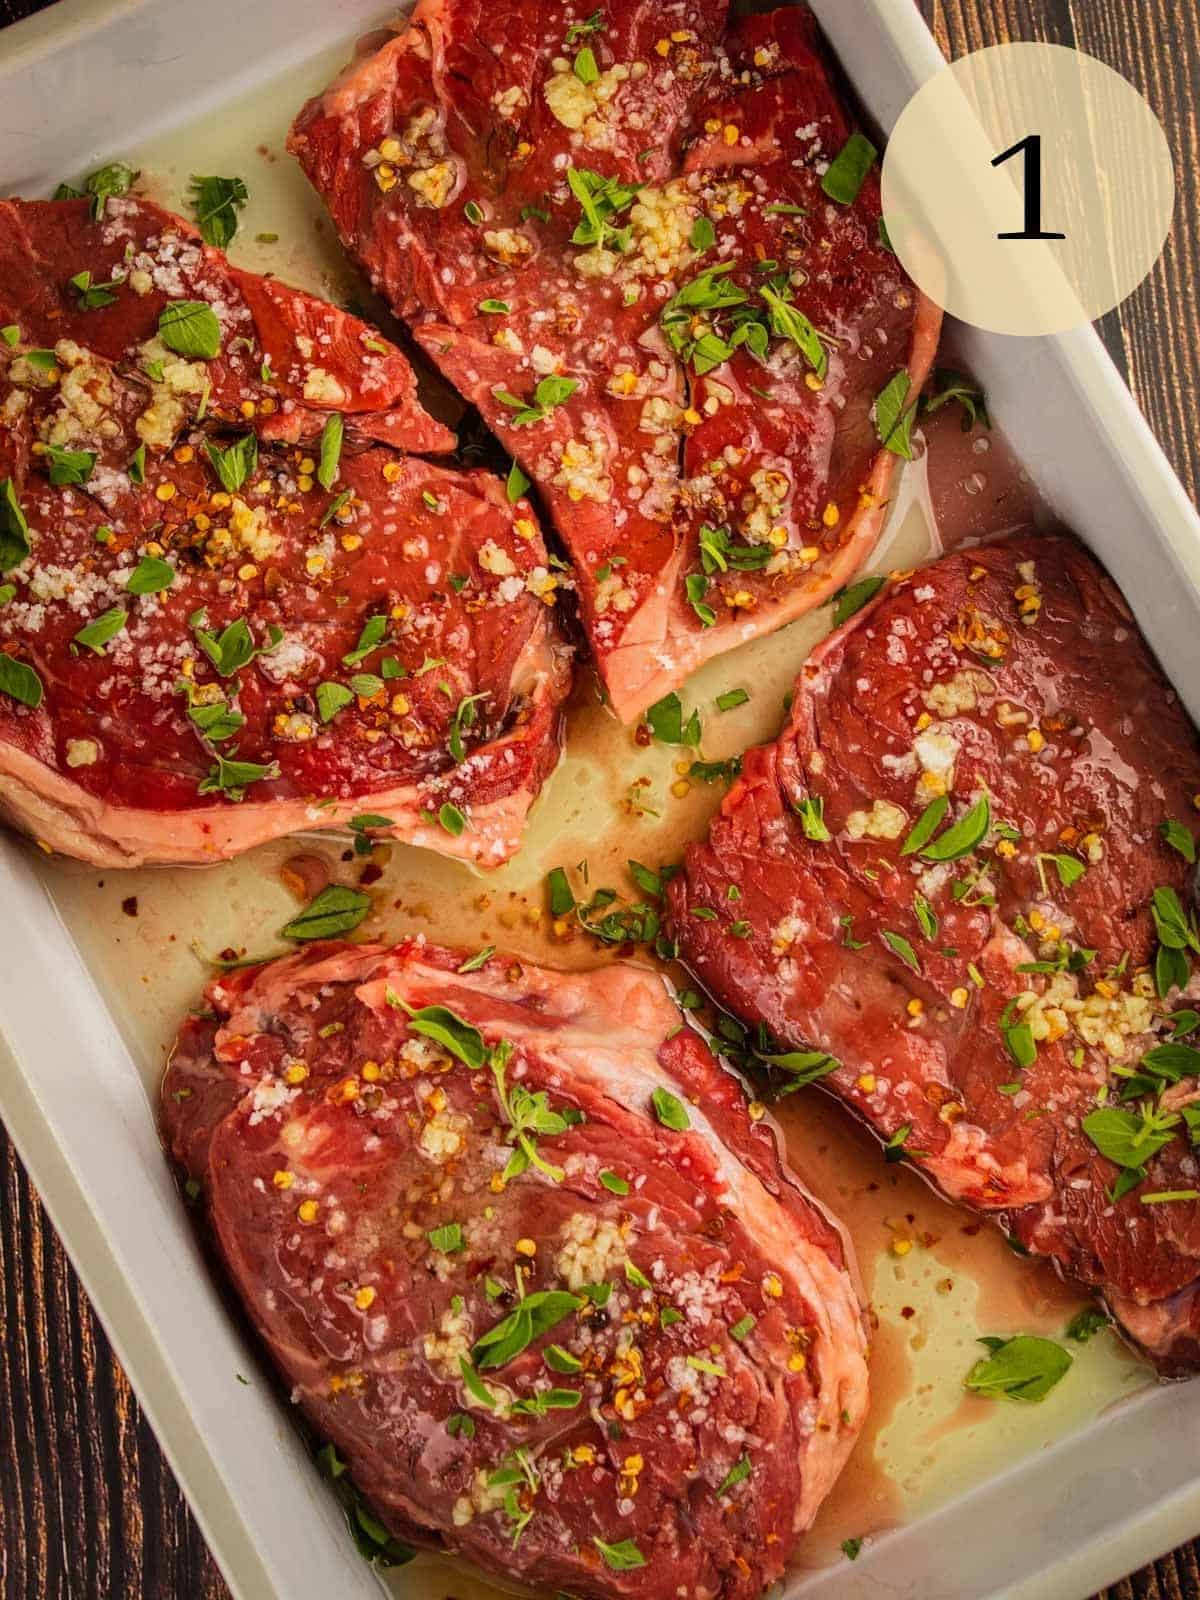 raw sirloin steaks marinating in oil, vinegar and seasoning in a white baking dish.